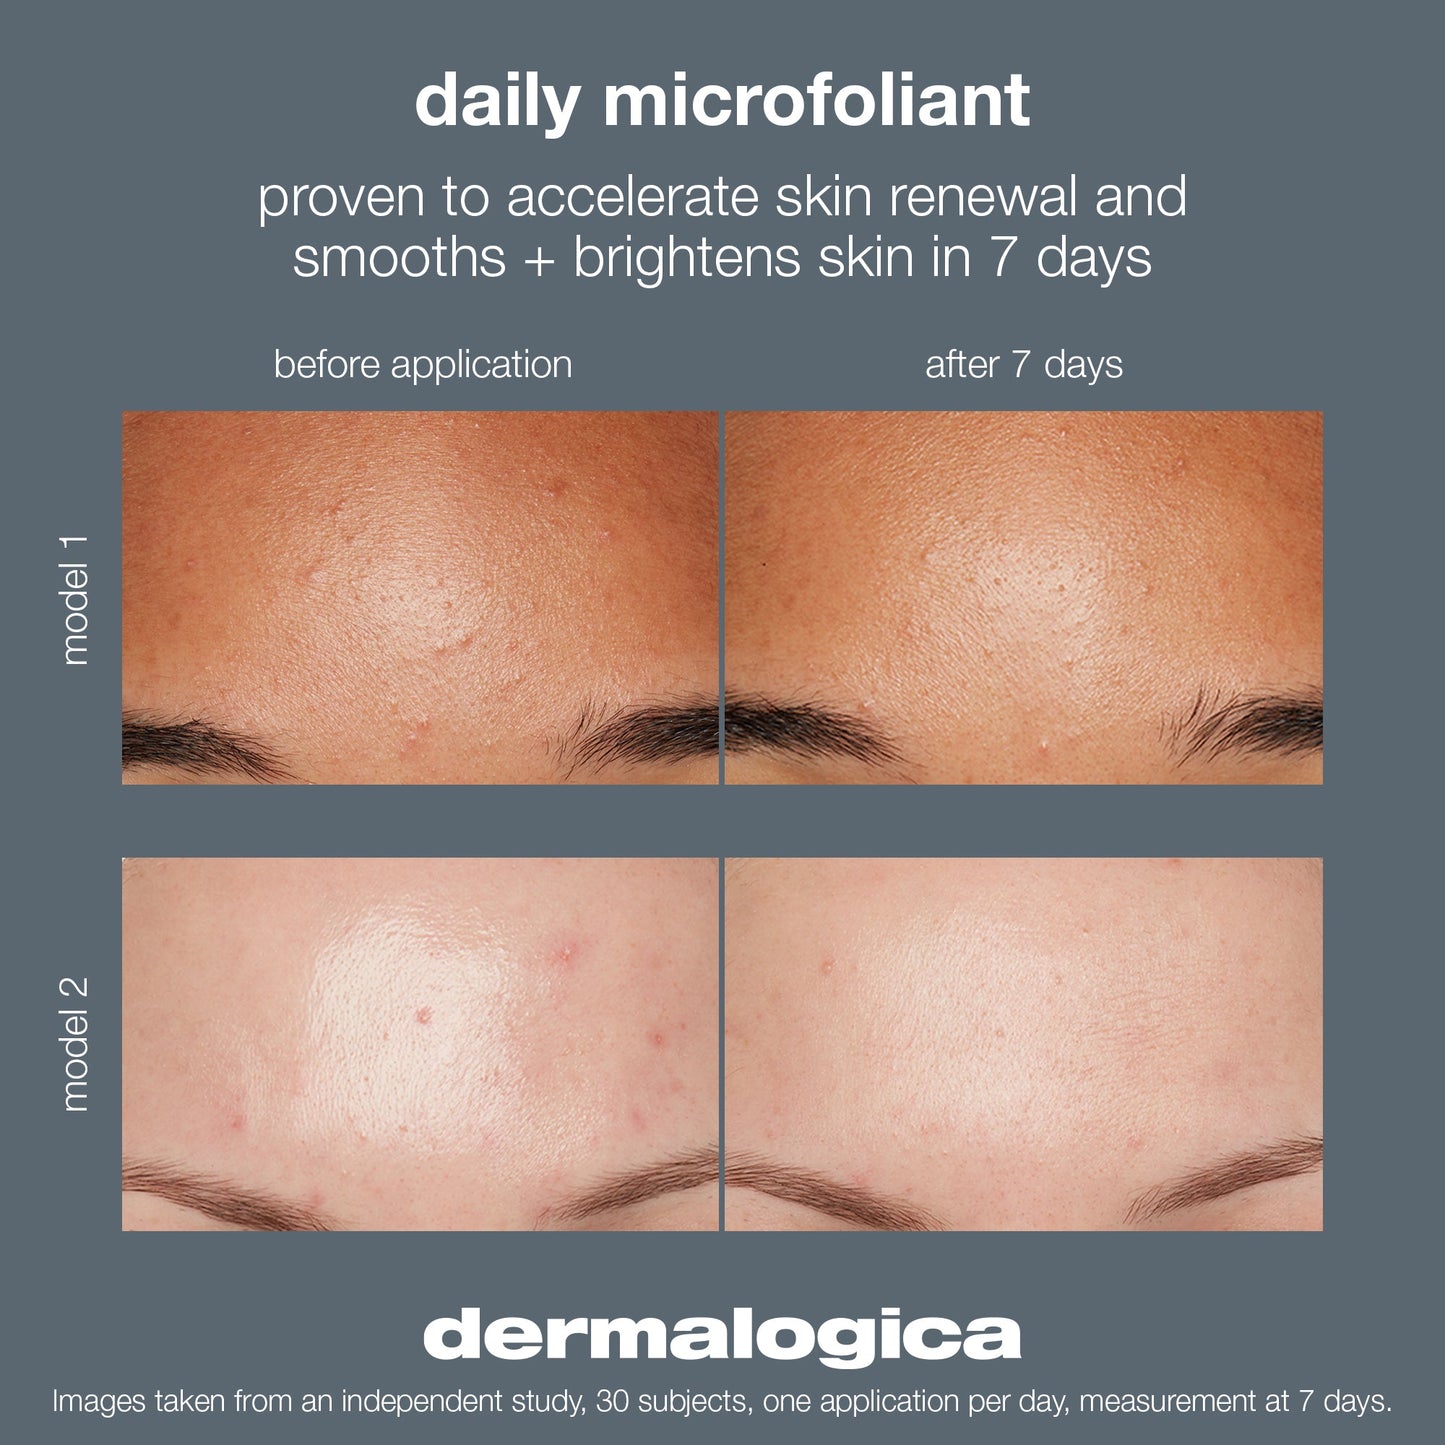 Daily Microfoliant before and after. Proven to accelerate skin renewal and smooths and brightens skin in 7 days. Based on an independent study with 30 subjects, one application per day.